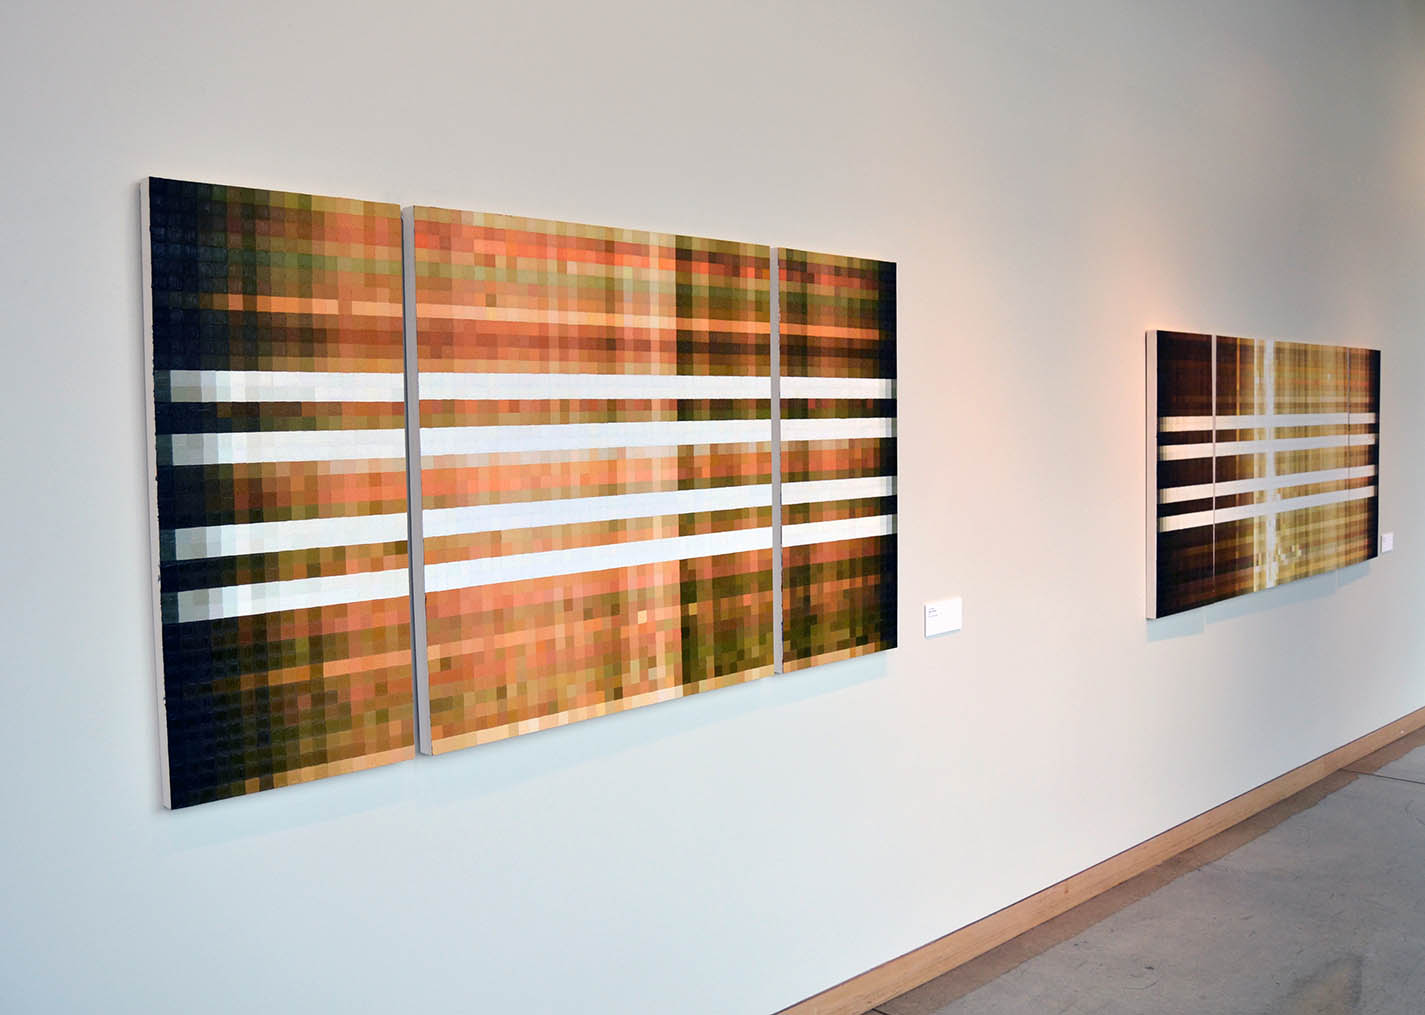 Solstices and Equinoxes: Installation View